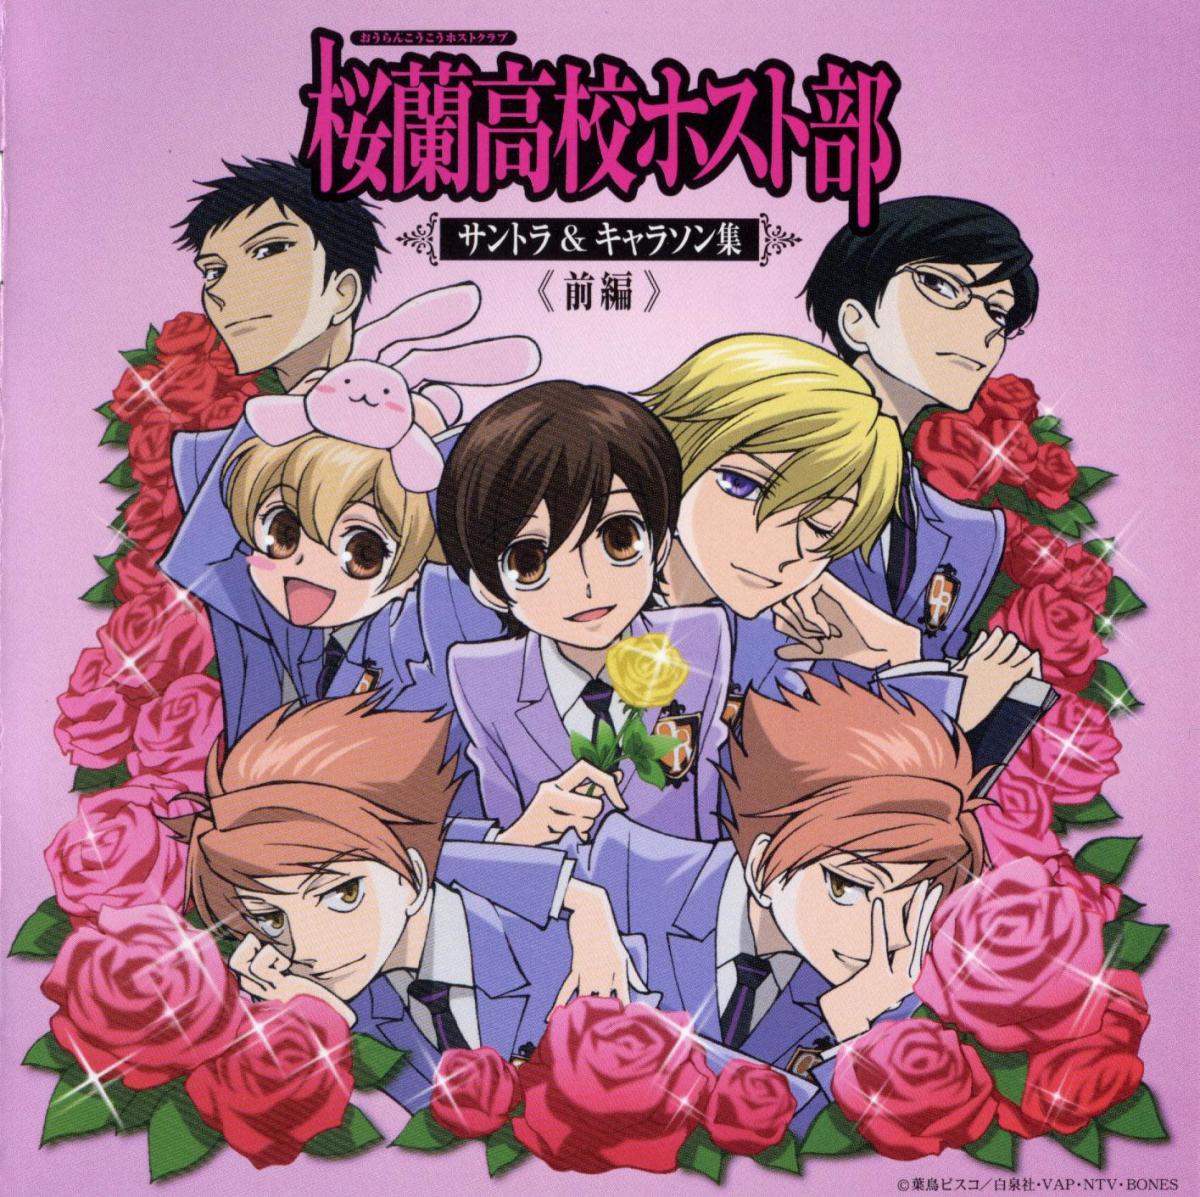 Ouran High School Host Club Anime Opening Ending Theme Songs